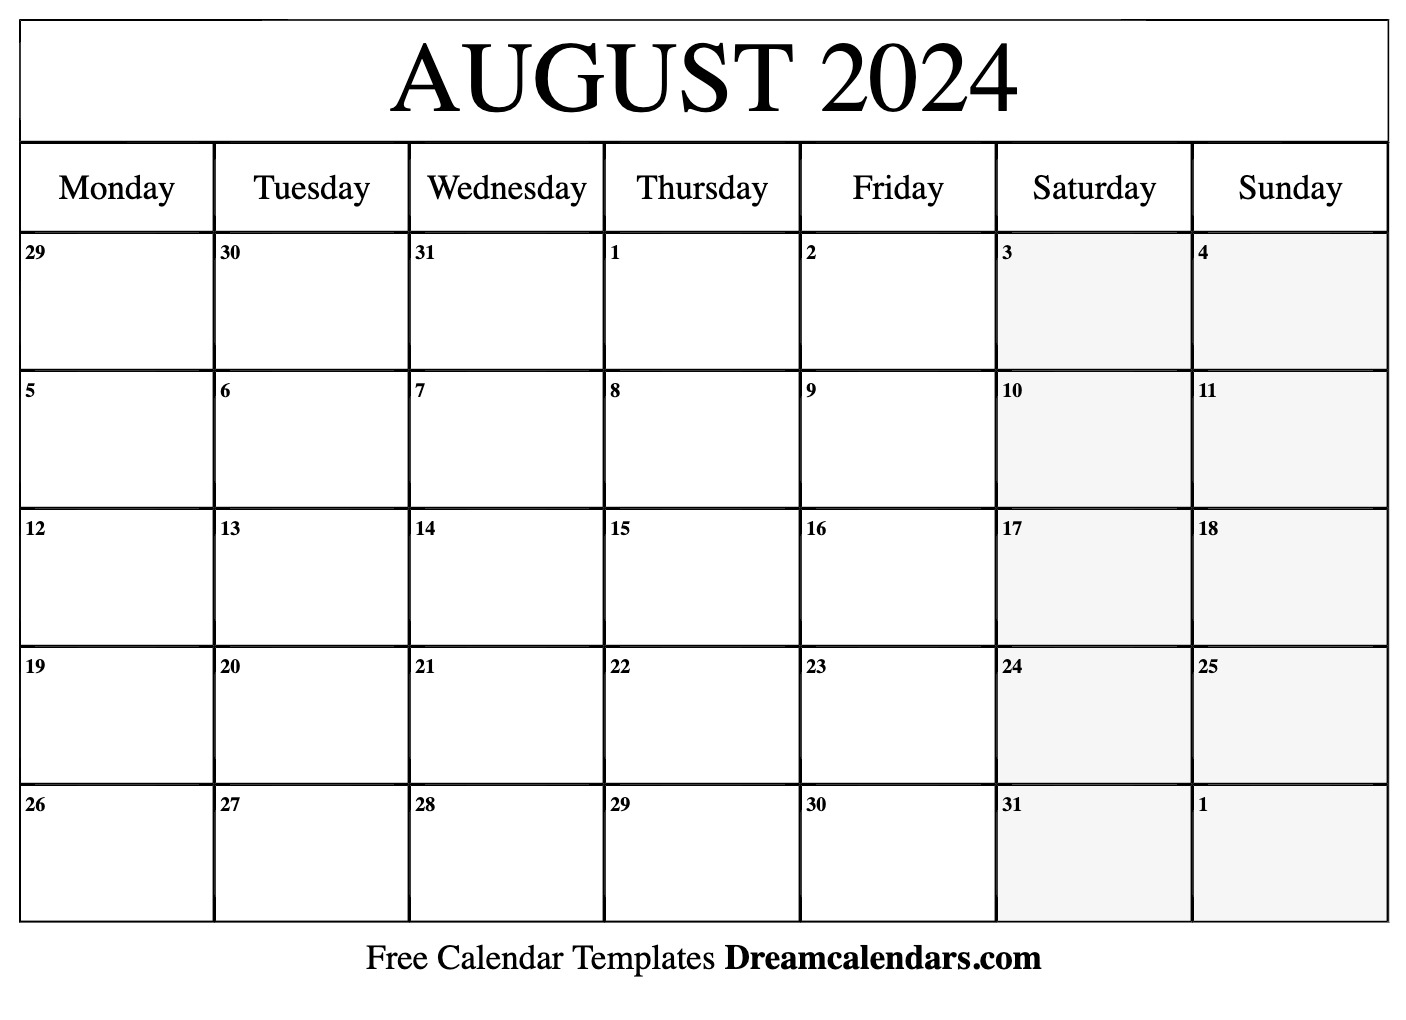 August 2024 Calendar | Free Blank Printable With Holidays for Printable August 2024 Calendar